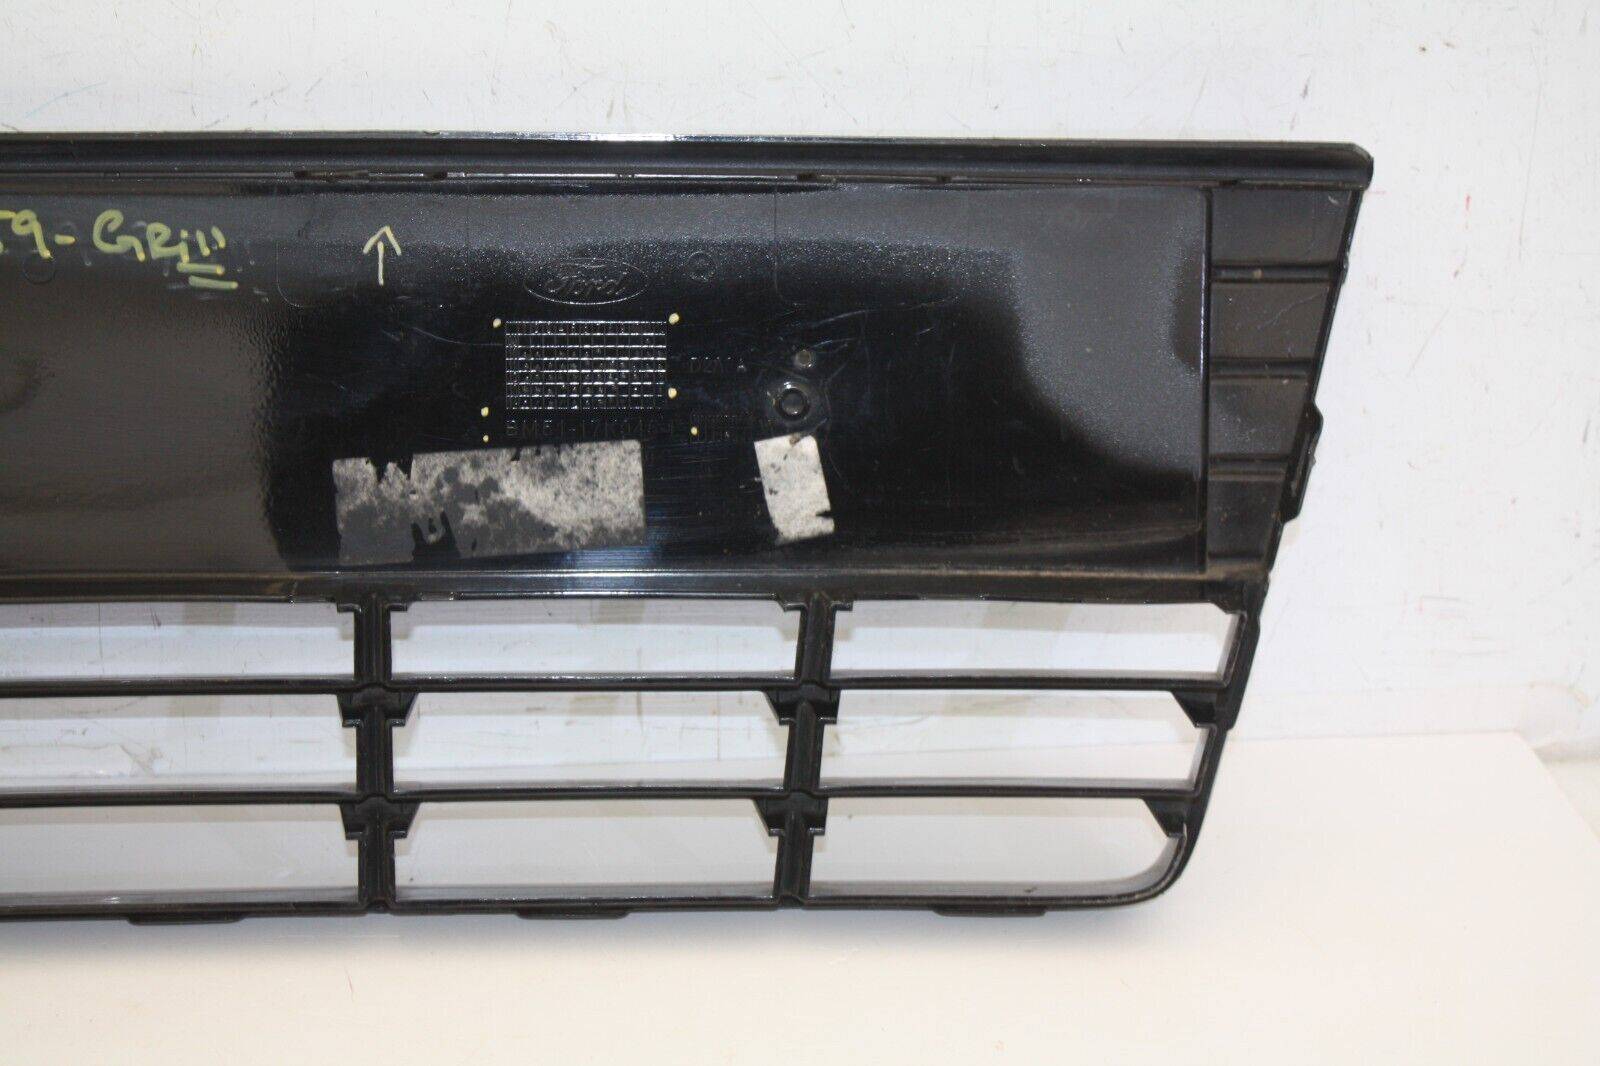 Ford-Focus-Front-Bumper-Grill-2011-TO-2014-BM51-17K945-E-Genuine-SEE-PICS-176238481574-11